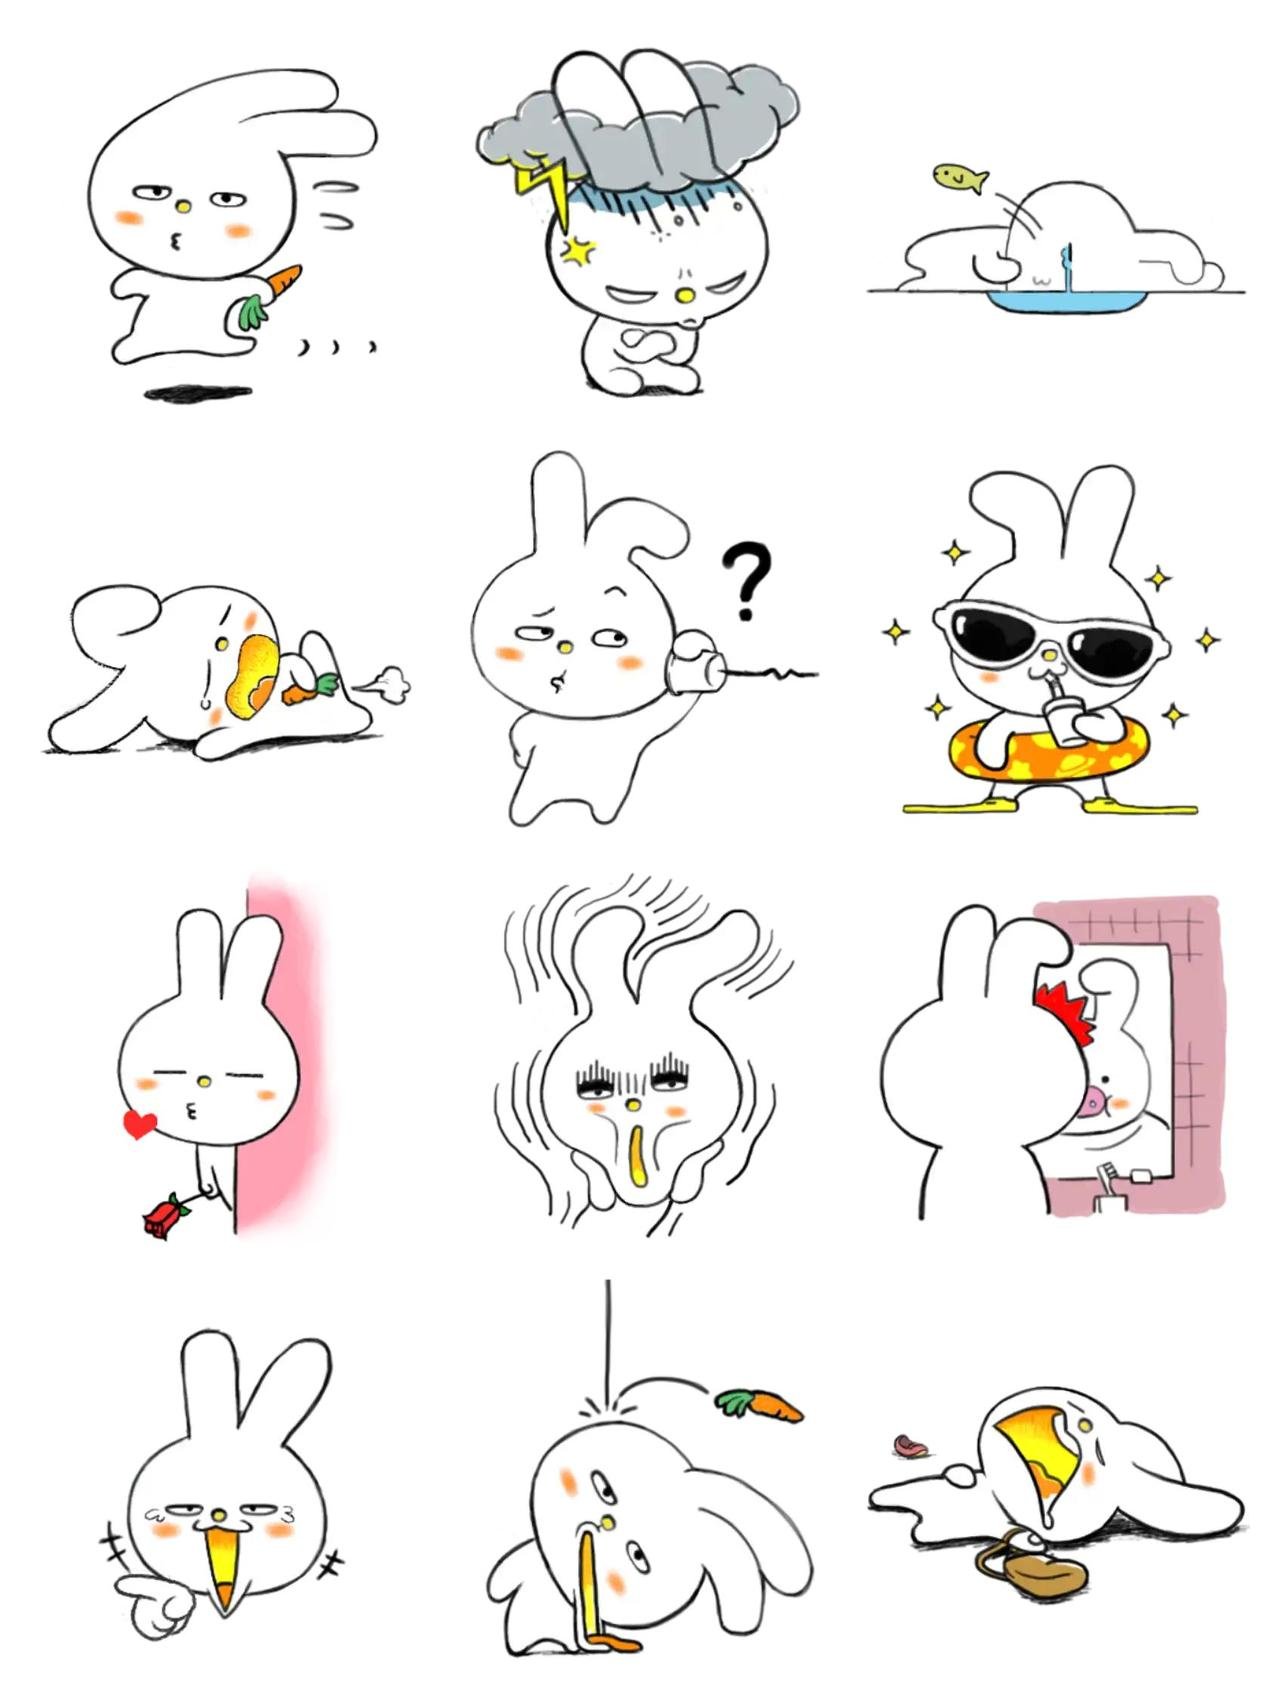 Jimini Rabbit Animals,Gag sticker pack for Whatsapp, Telegram, Signal, and others chatting and message apps